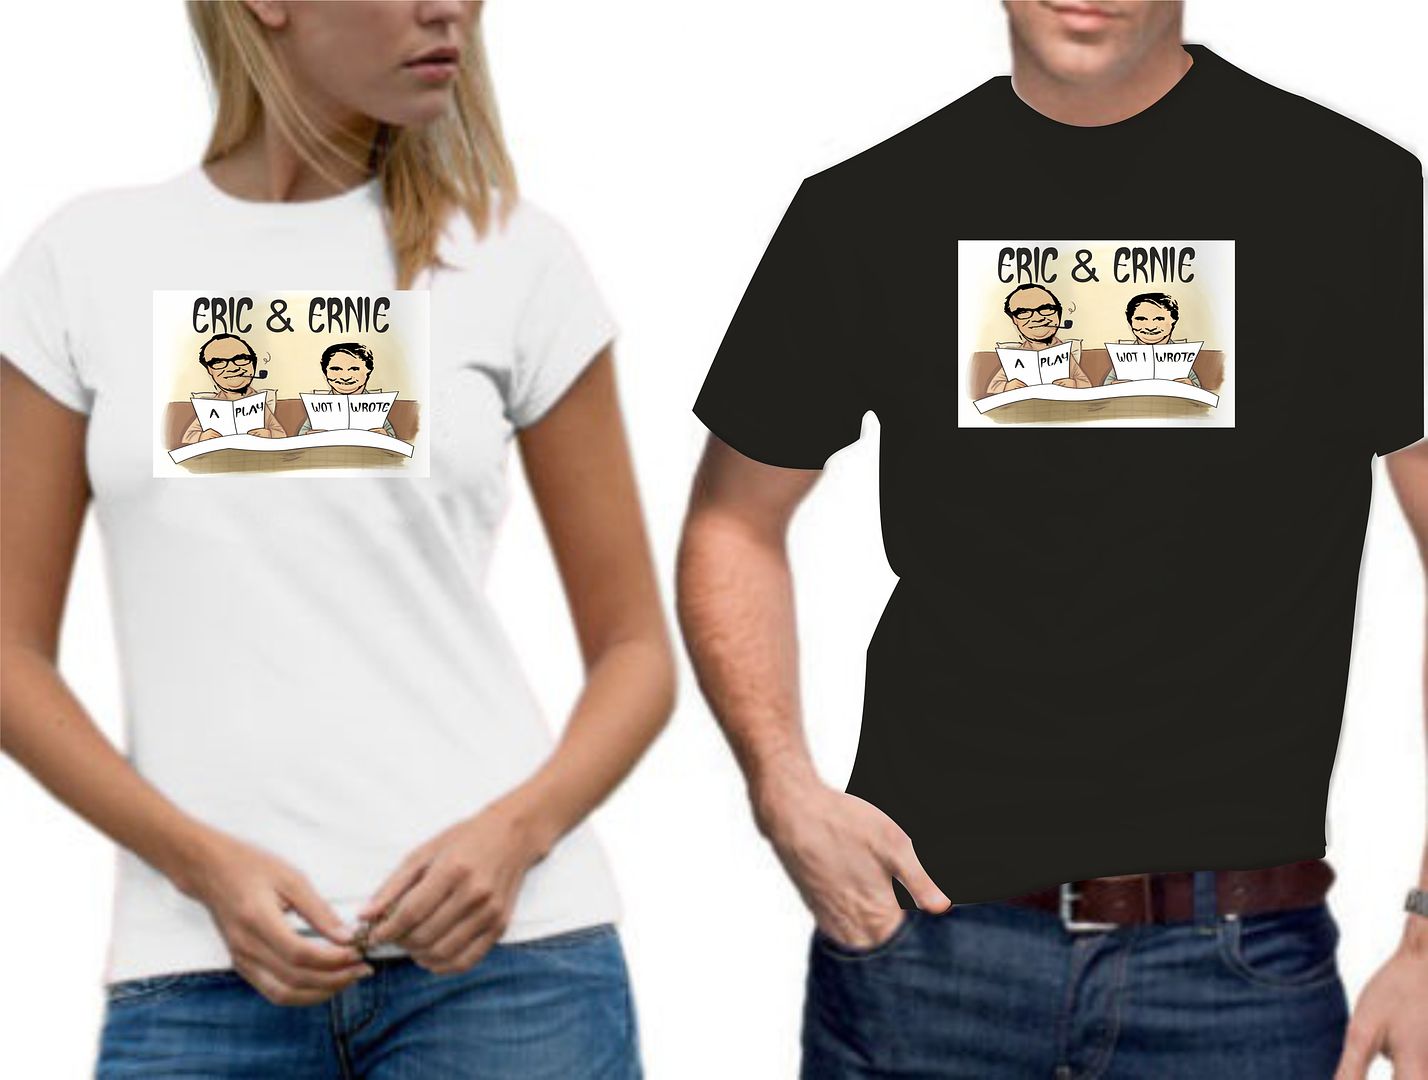  photo 300 RISKYT ERIC AND ERNIE IN BED MODEL T SHIRT_zpsdcg6pr8l.jpg